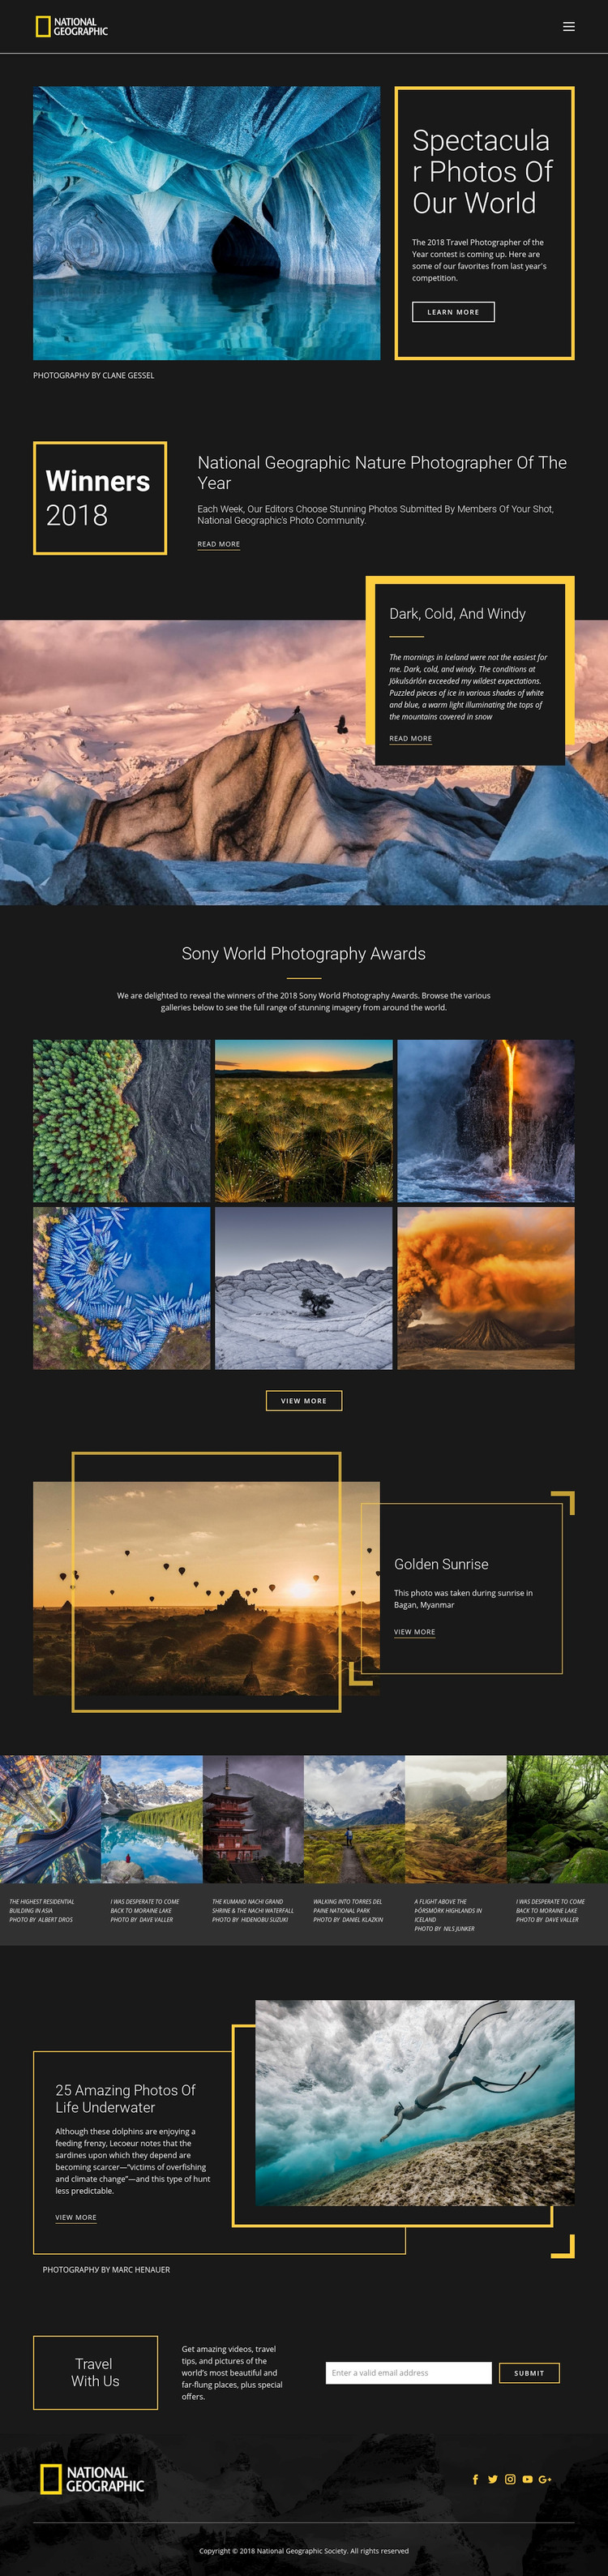 Pictures of nature Elementor Template Alternative